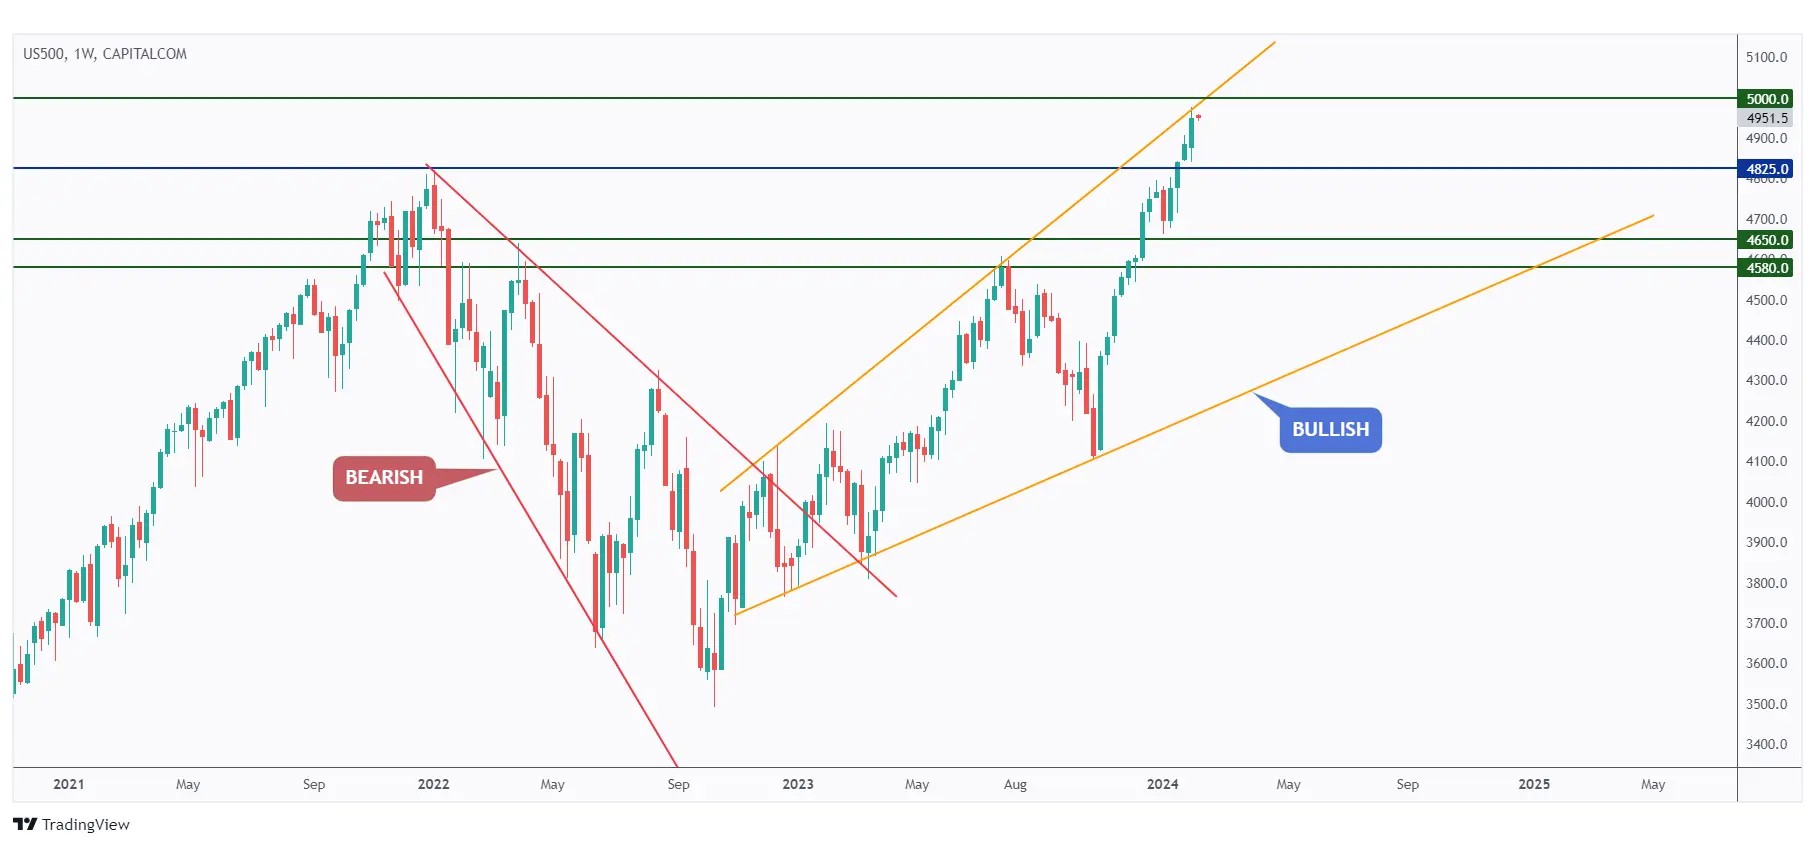 US500 weekly chart showing the overall bullish trend from a long-term perspective trading inside a giant rising broadening wedge pattern.